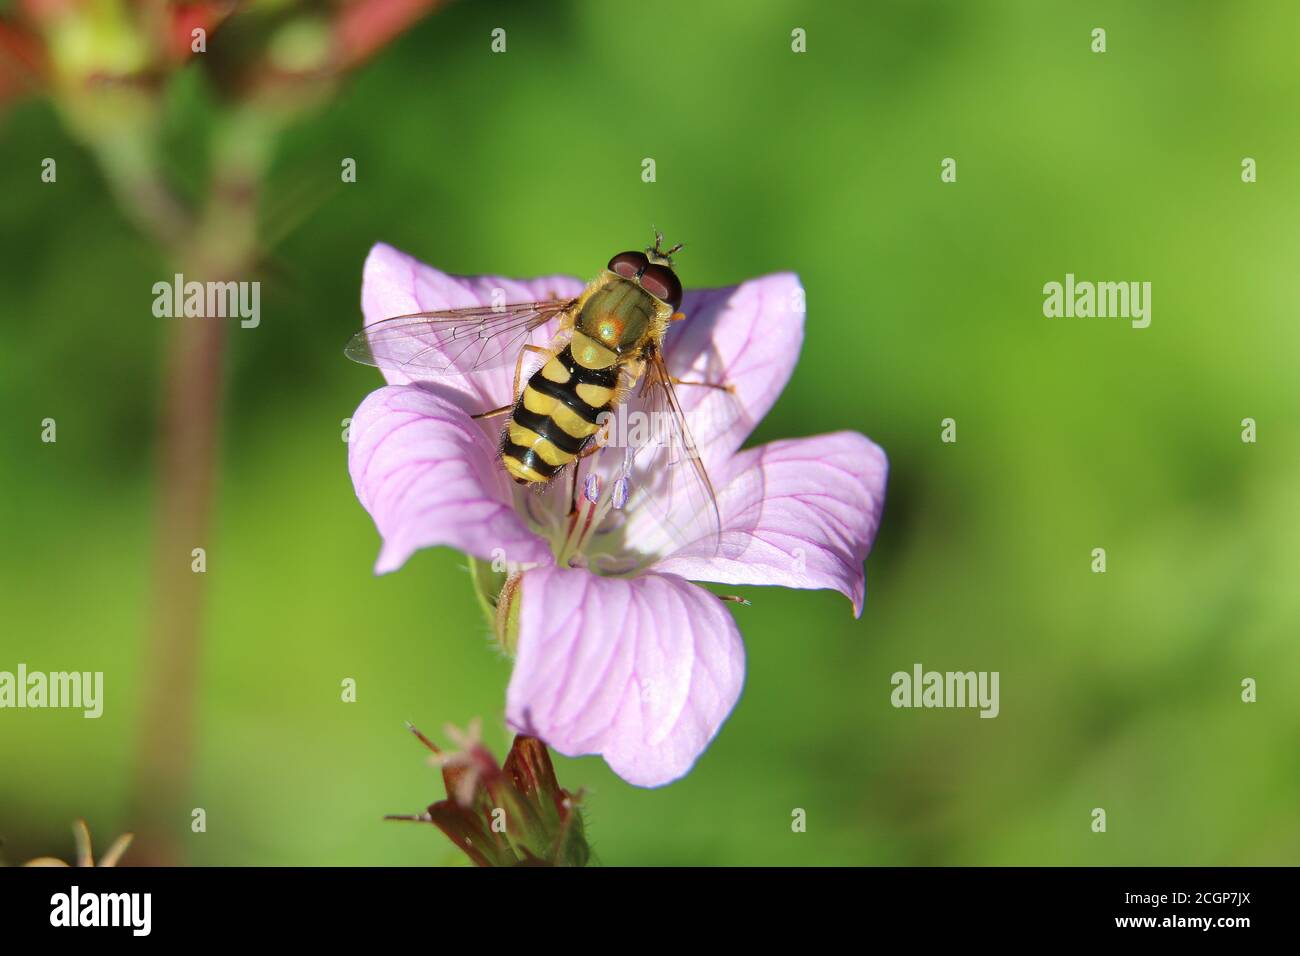 Yellow and black stripy male hoverfly or flower fly, Syrphus ribesii, on a pink cranesbill flower, close up, above view, green diffused background Stock Photo